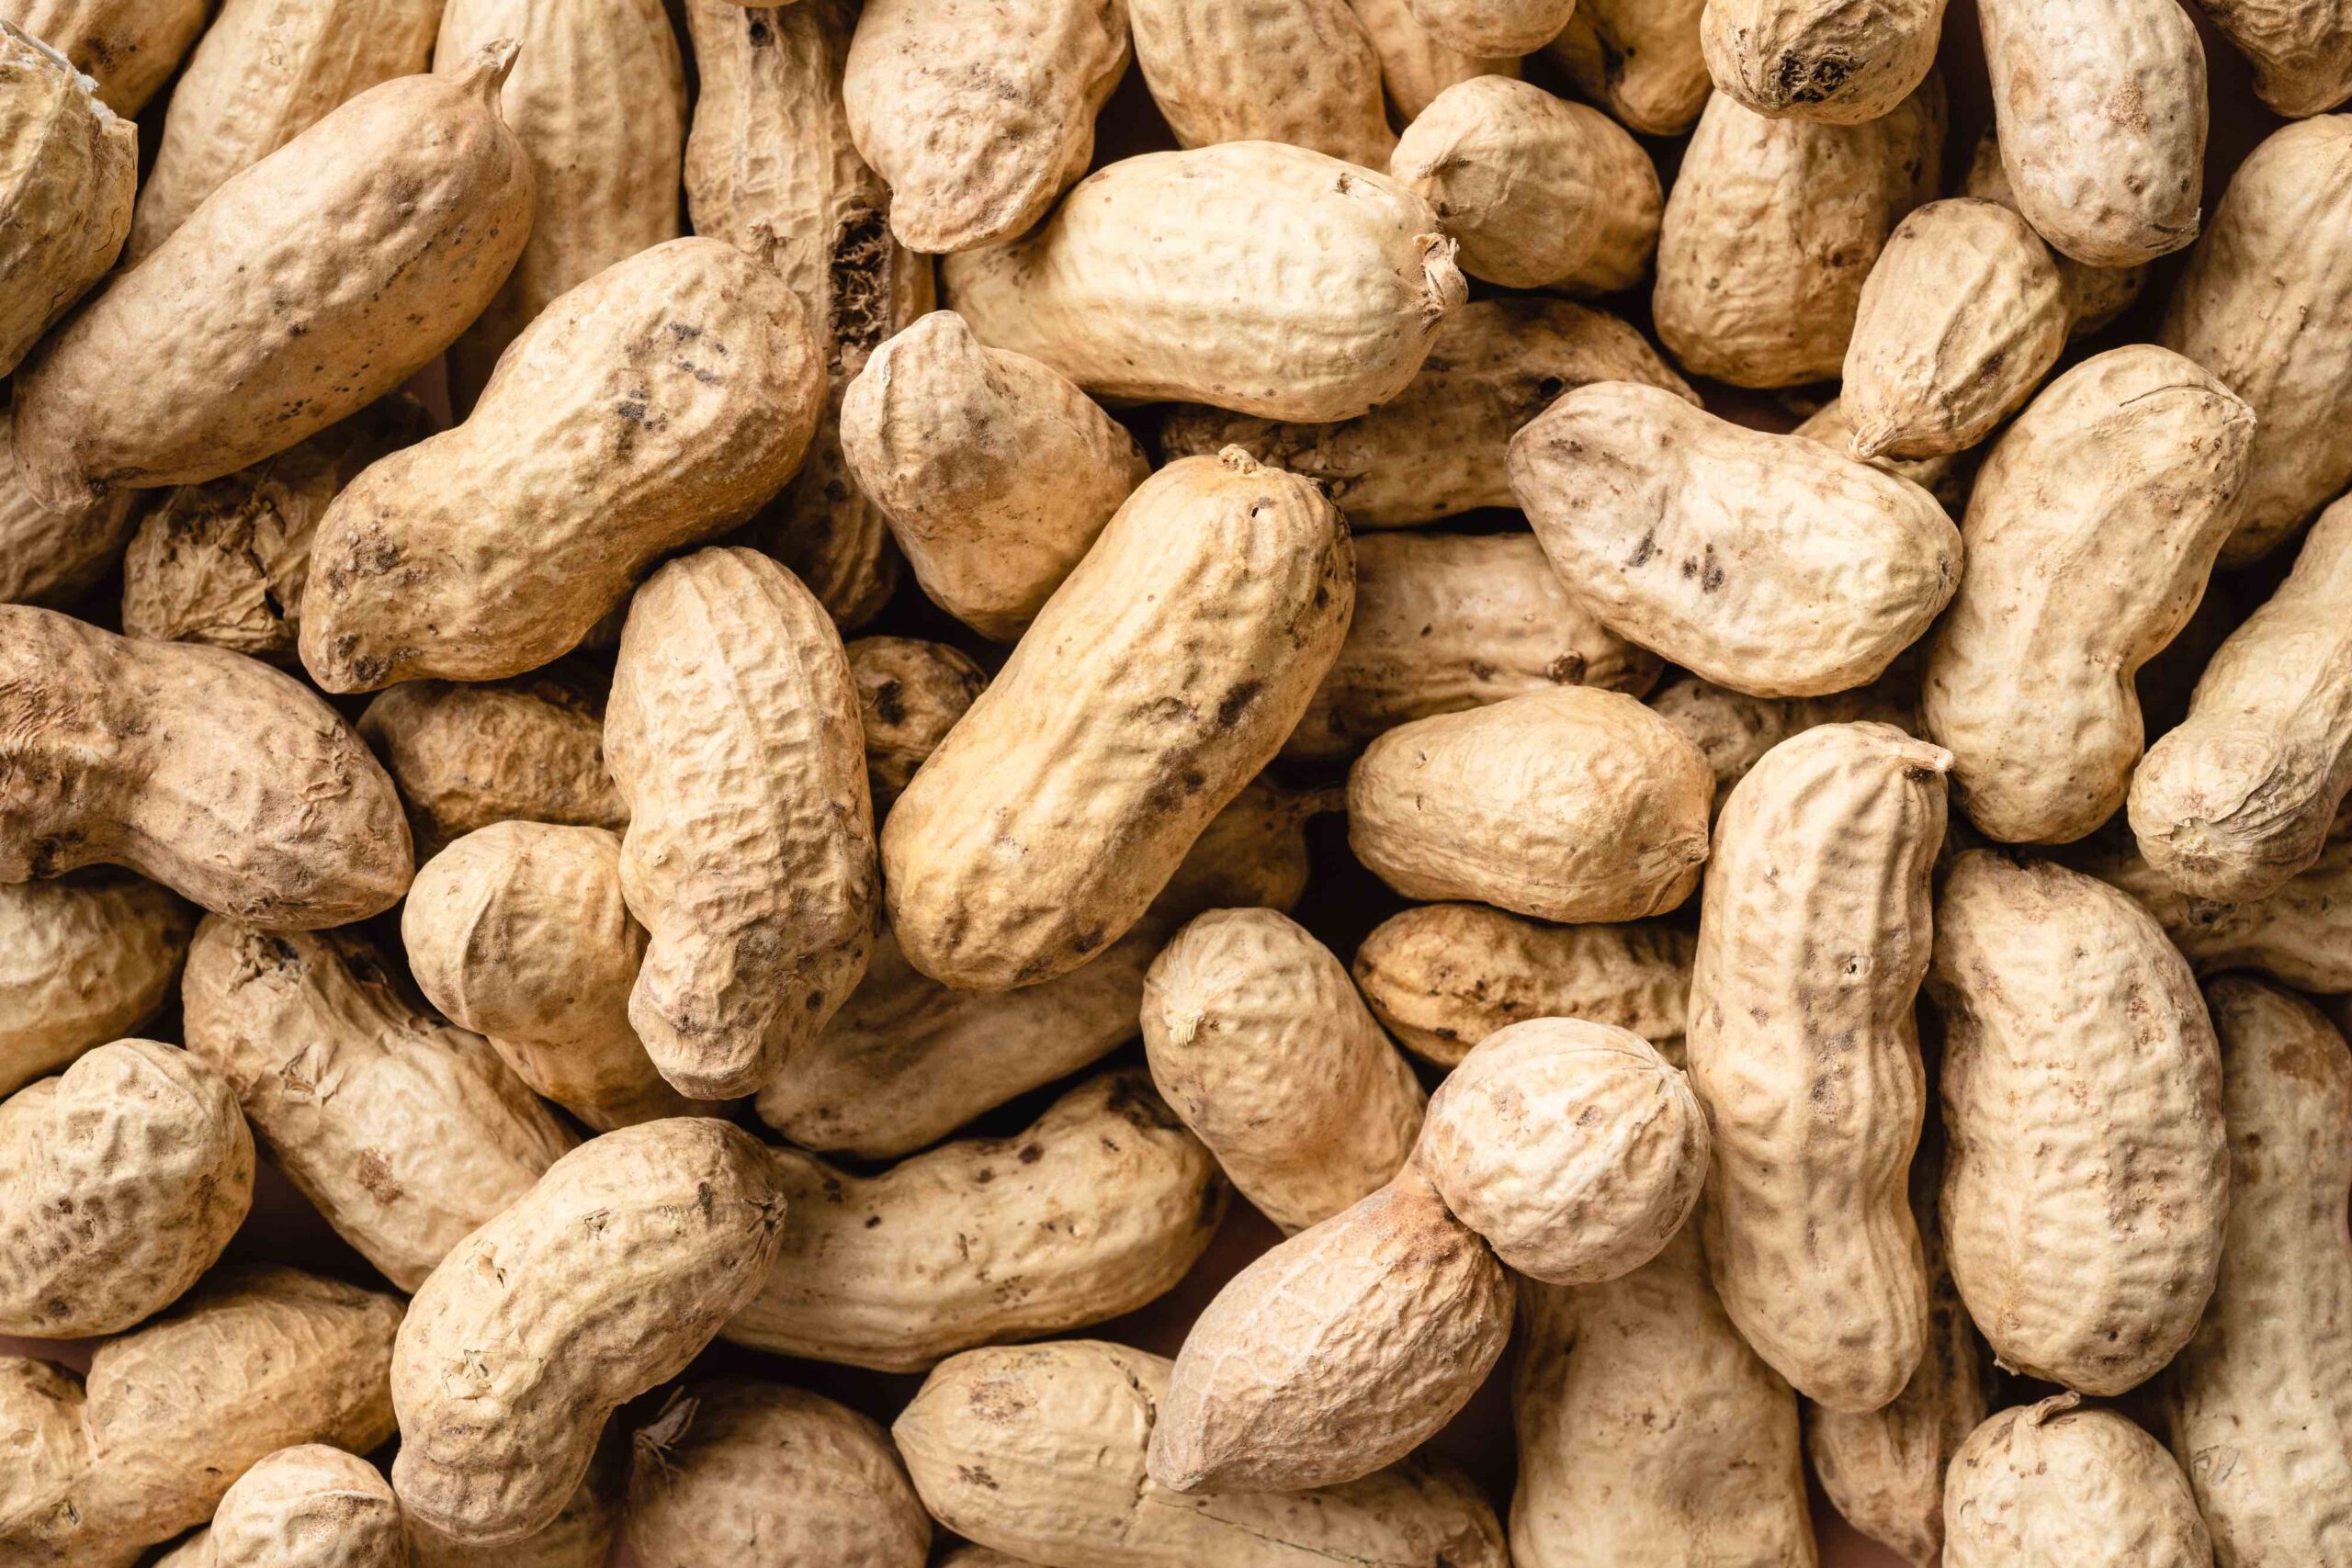 Peanut Acreage Projected to Increase in 2023